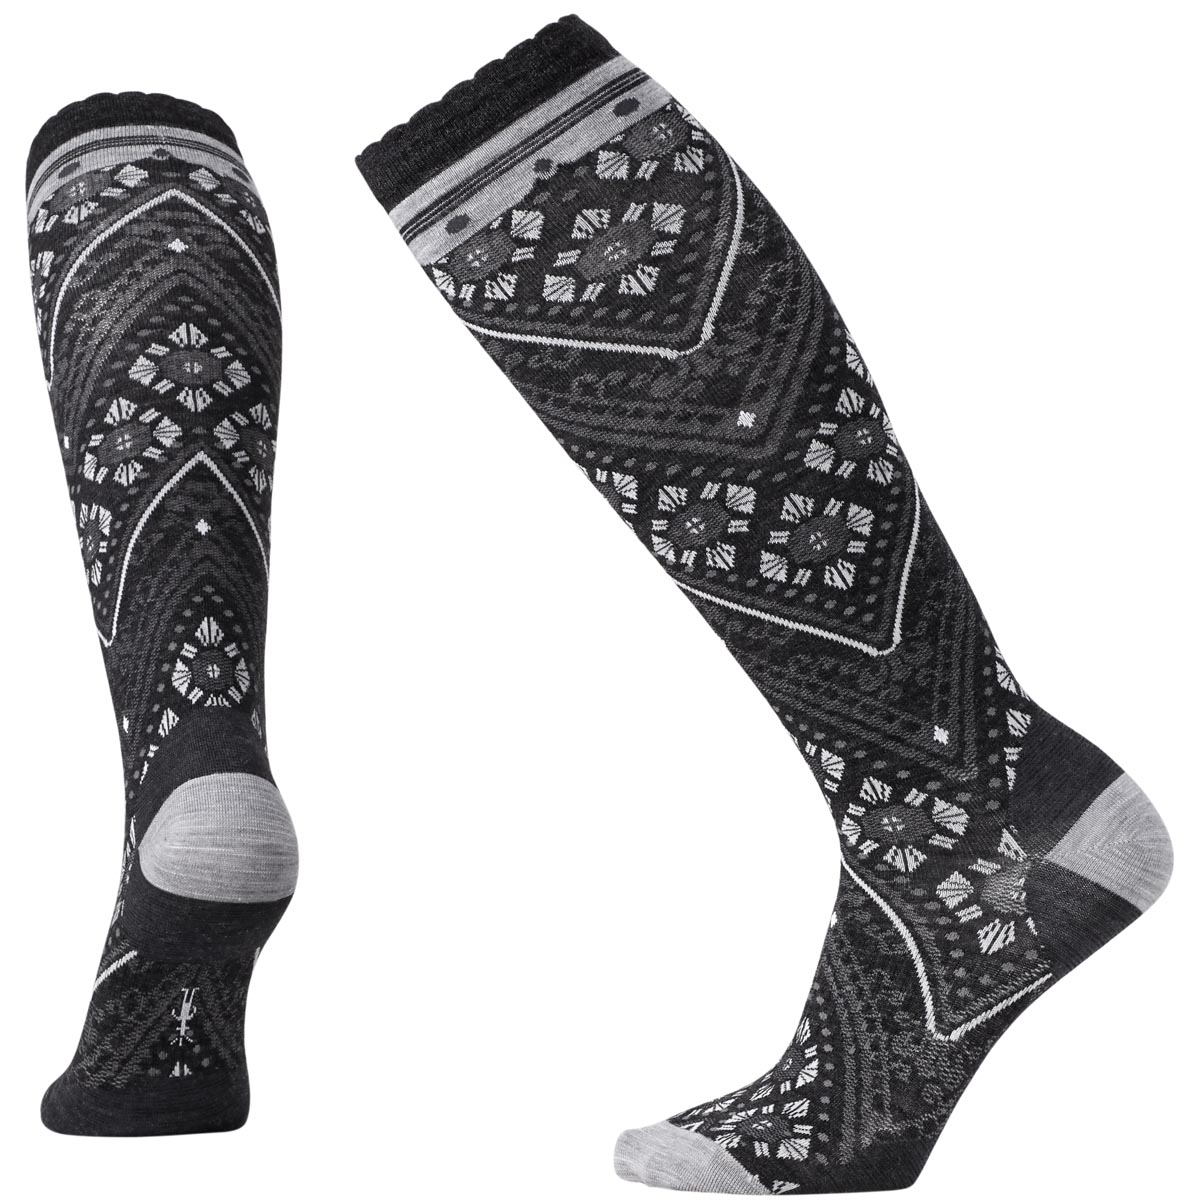 SmartWool Women's Lingering Lace Knee High